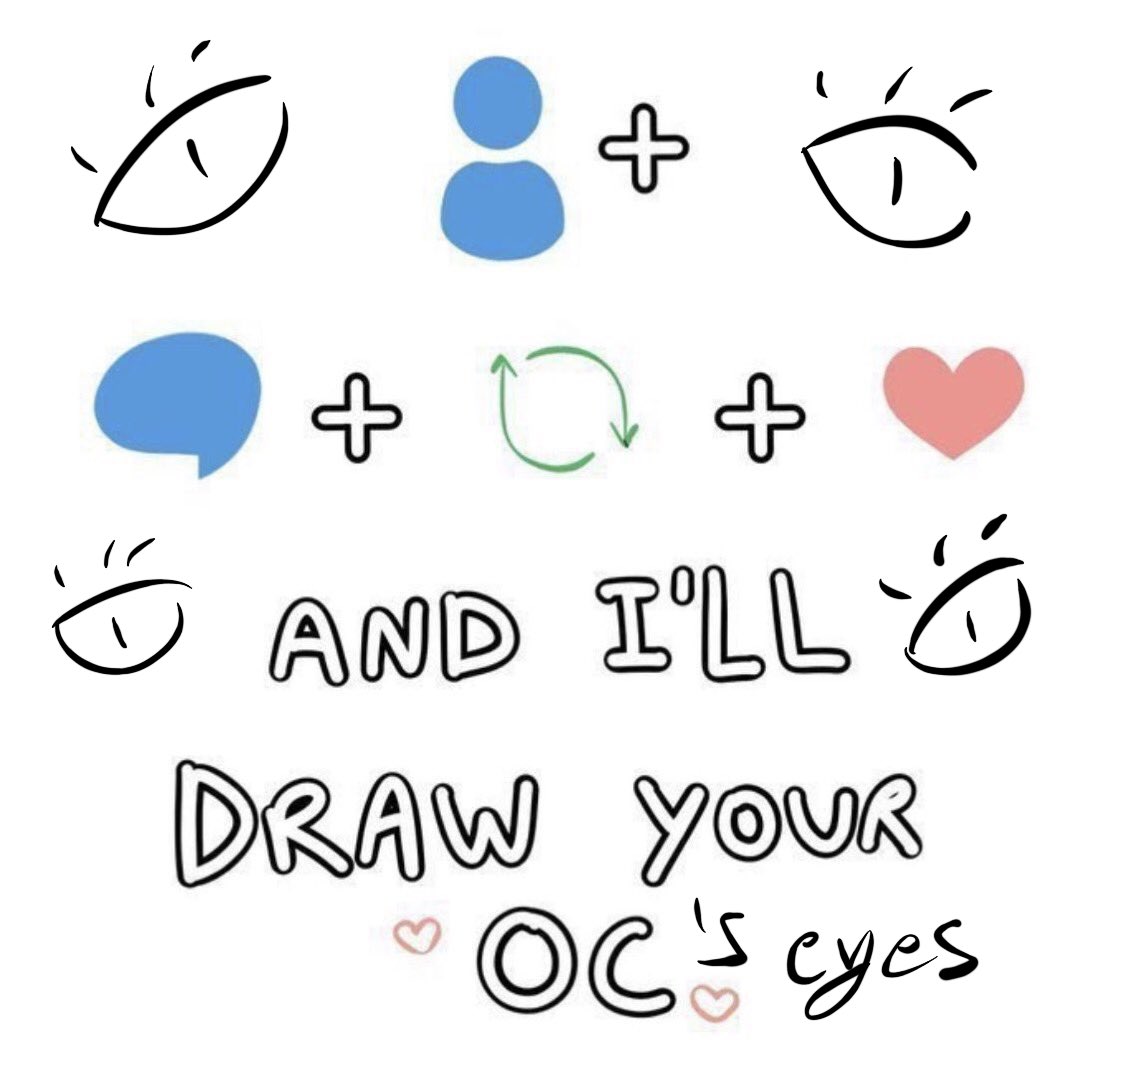 Hi guys! I’m trying to differ the way I draw eyes so I’m doing this as just drawing OCs eyes! 

I’m going to pick only a few so I don’t get overwhelmed!